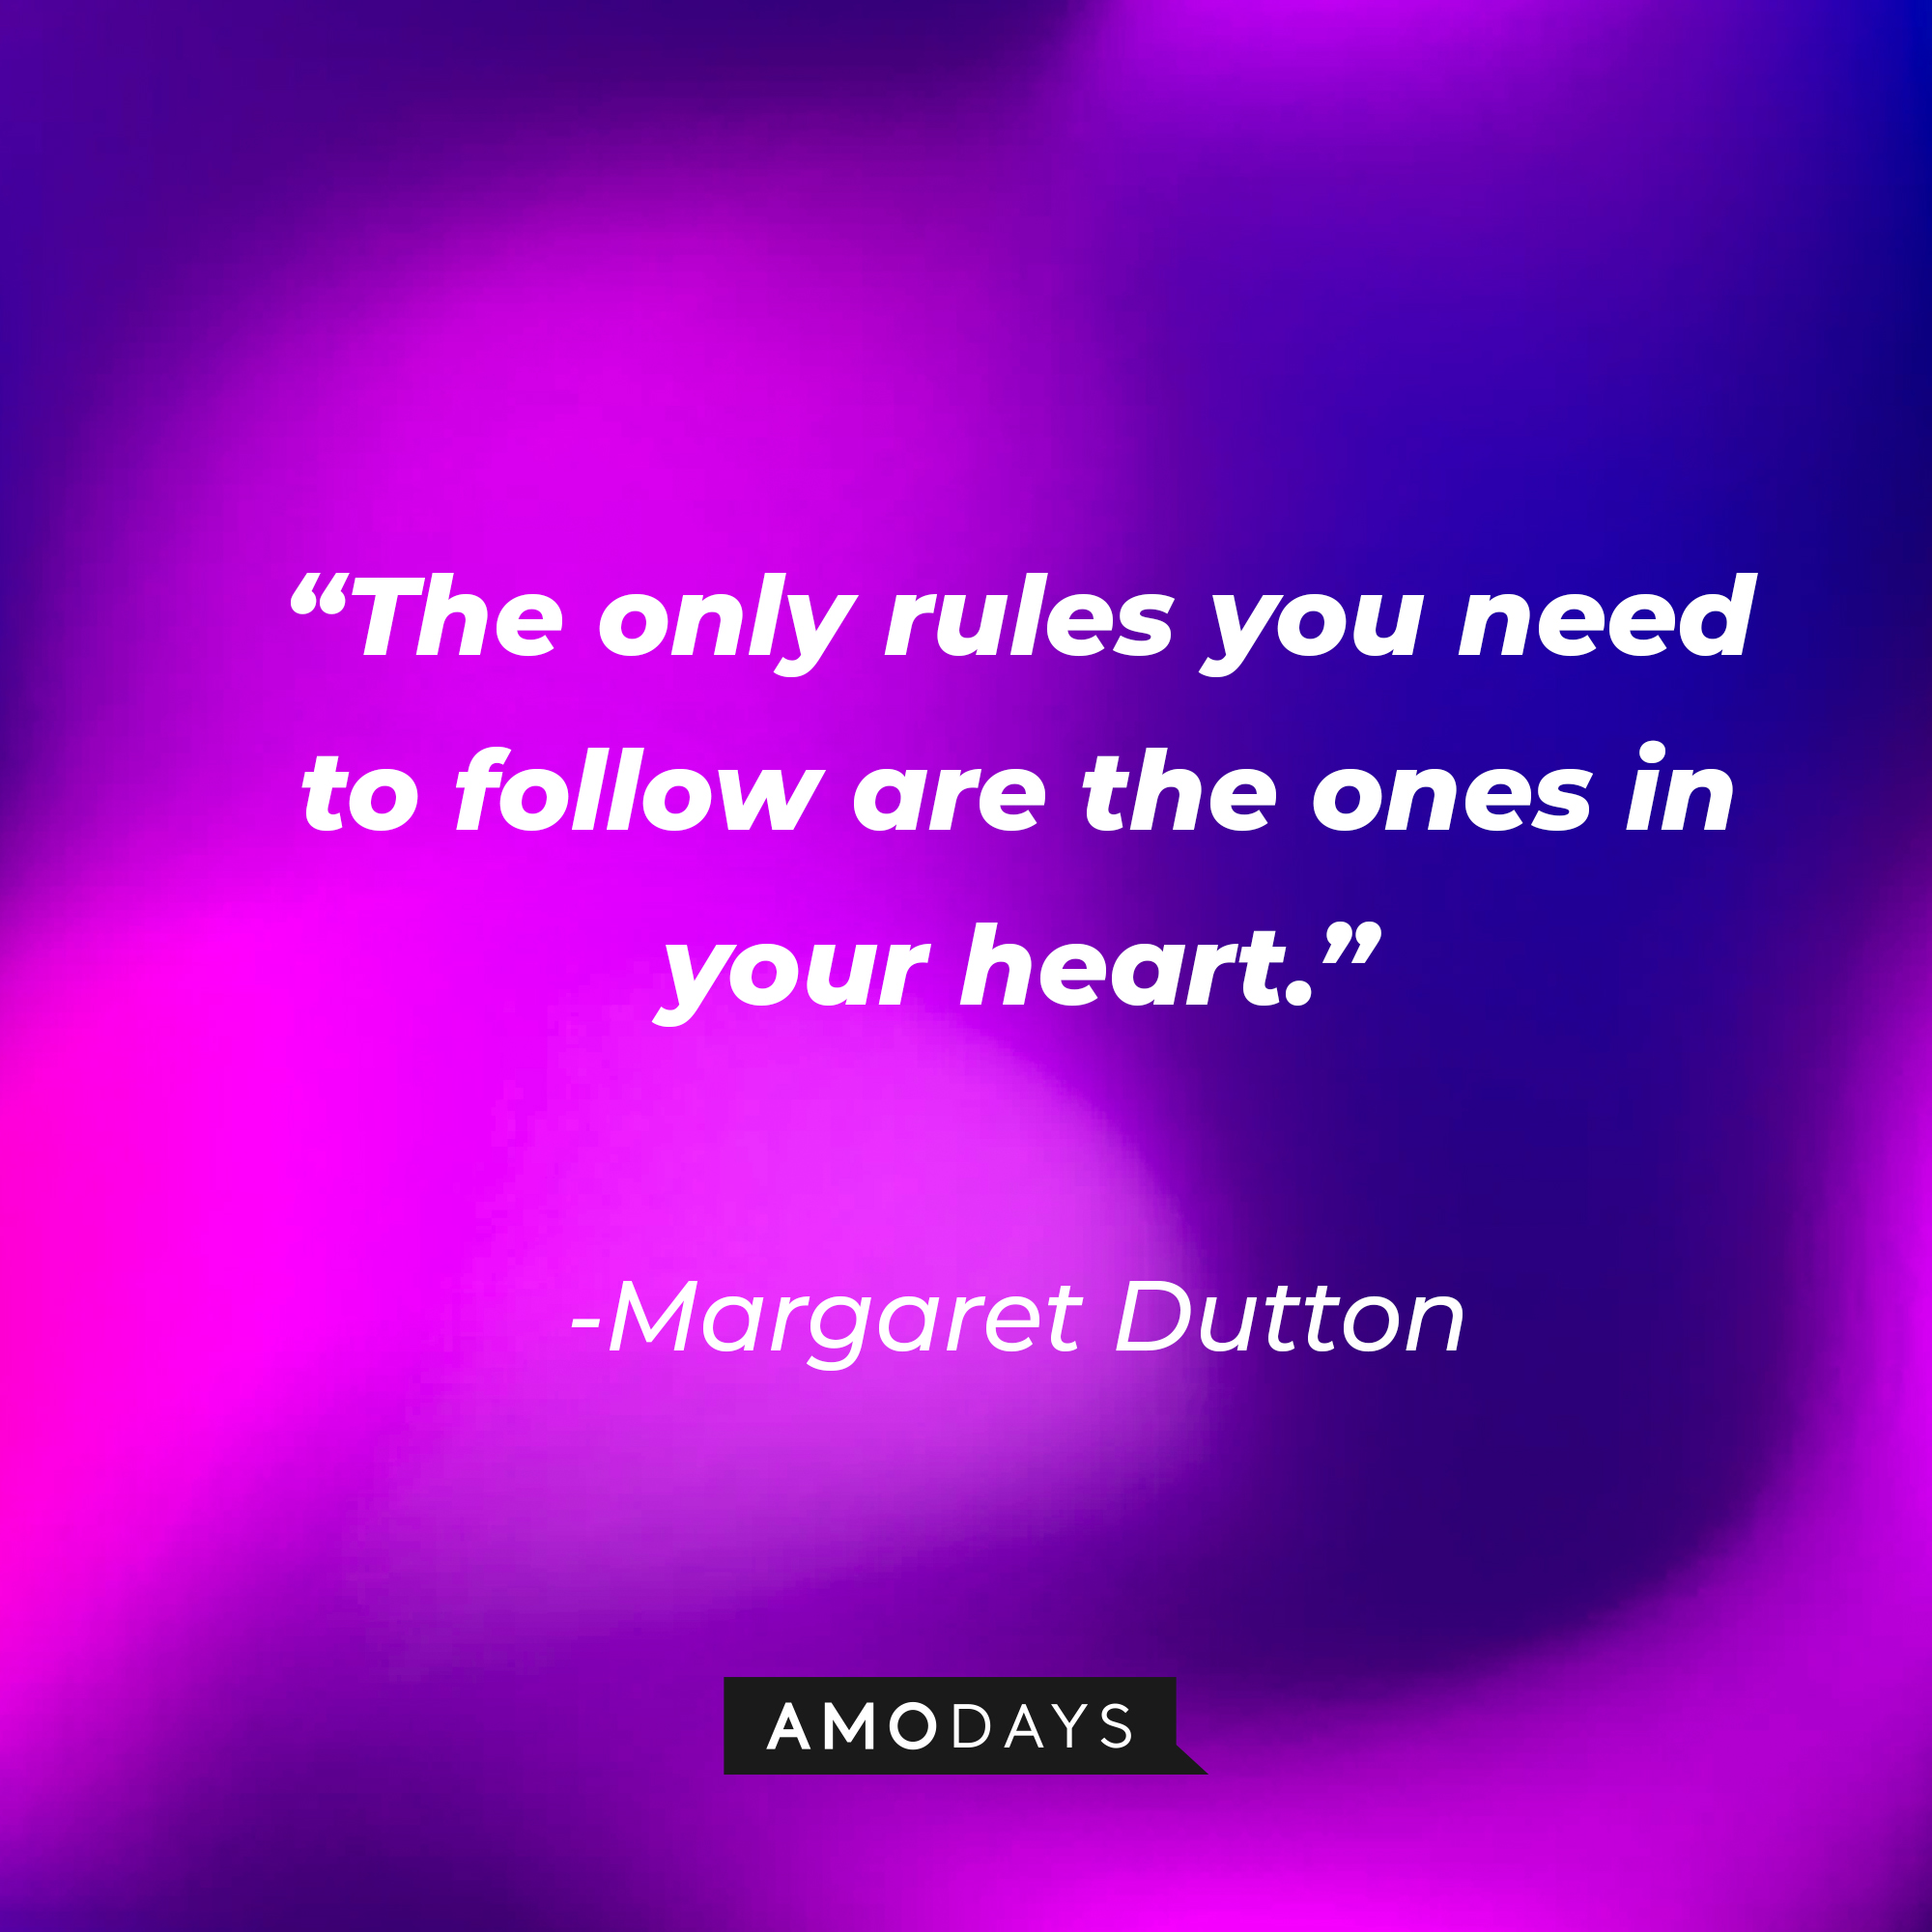 Margaret Dutton’s quote: “This trail, this is as free as you’ll ever be. The only rules you need to follow are the ones in your heart.” | Source: AmoDays